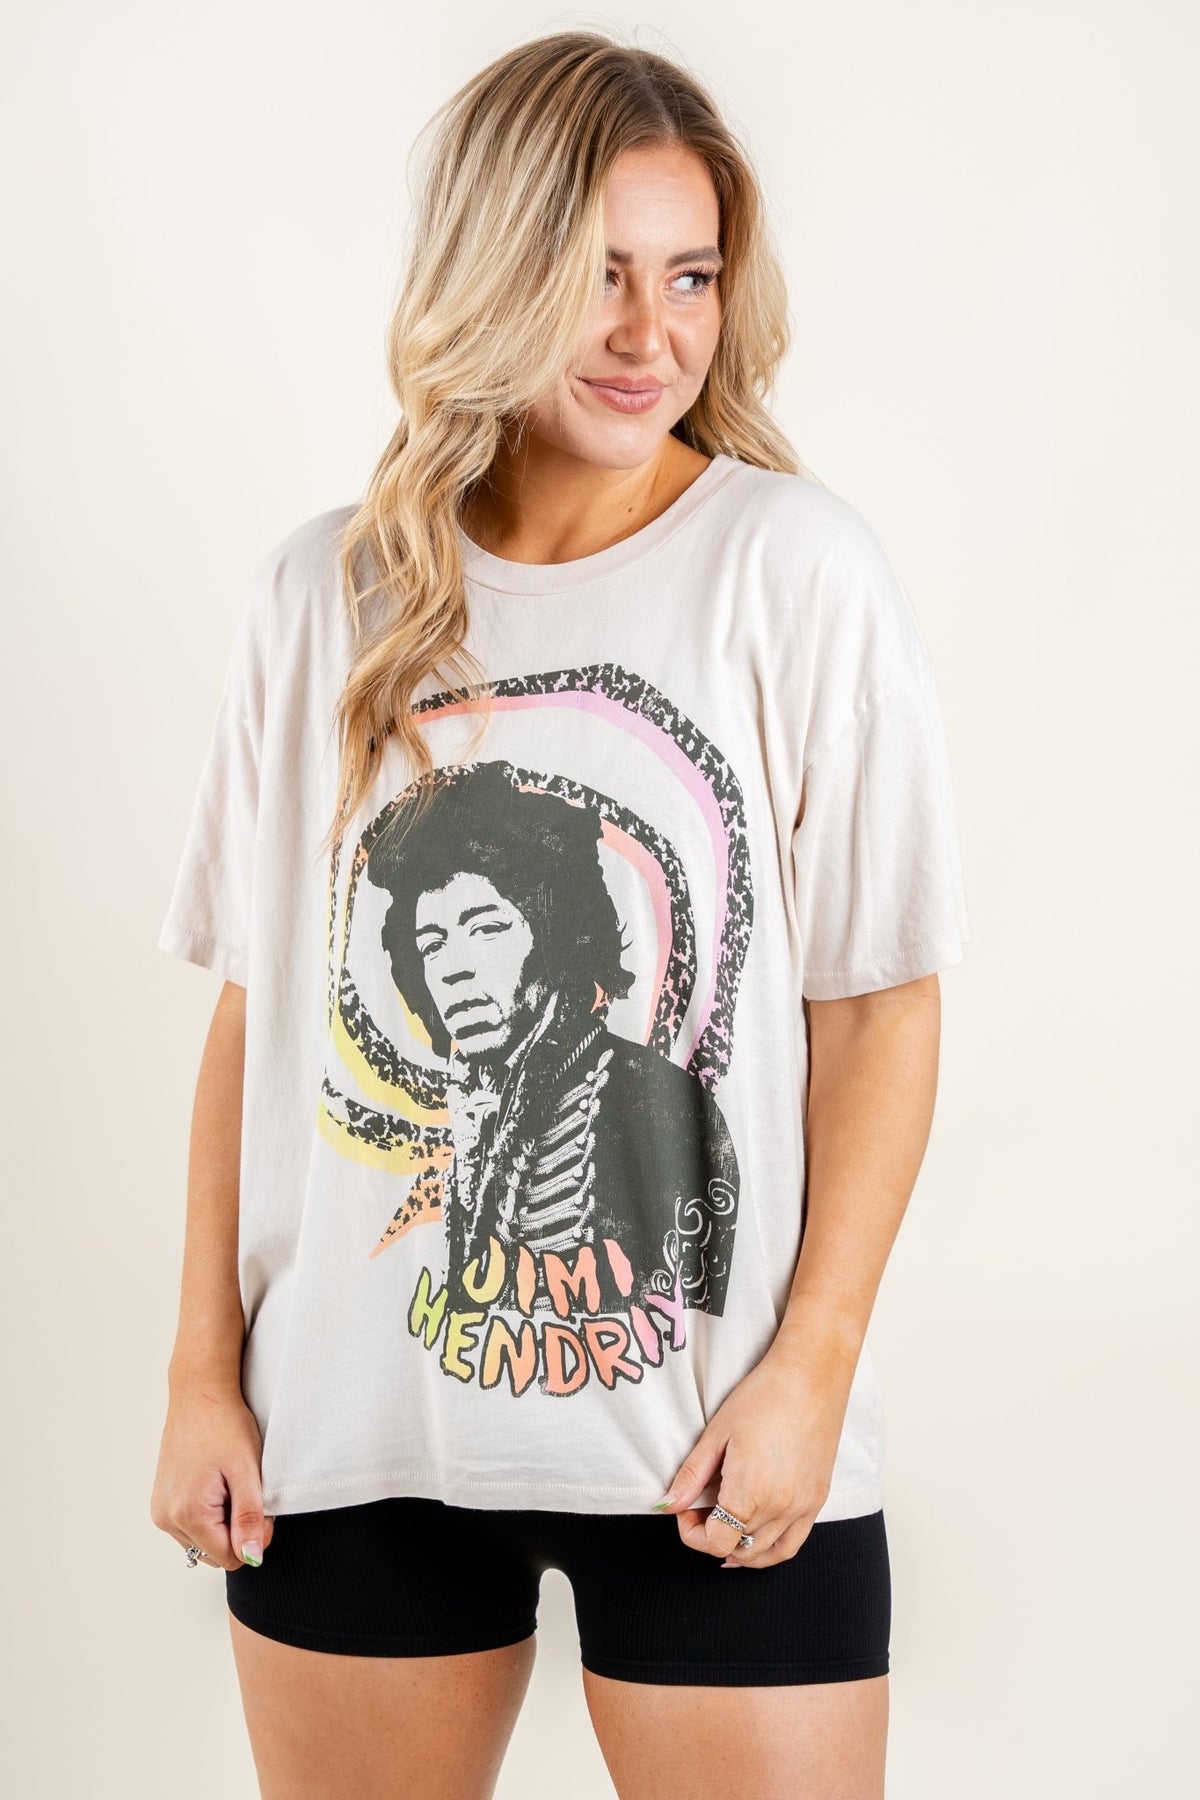 DayDreamer Jimi Hendrix spiral t-shirt dirty white - Trendy Band T-Shirts and Sweatshirts at Lush Fashion Lounge Boutique in Oklahoma City